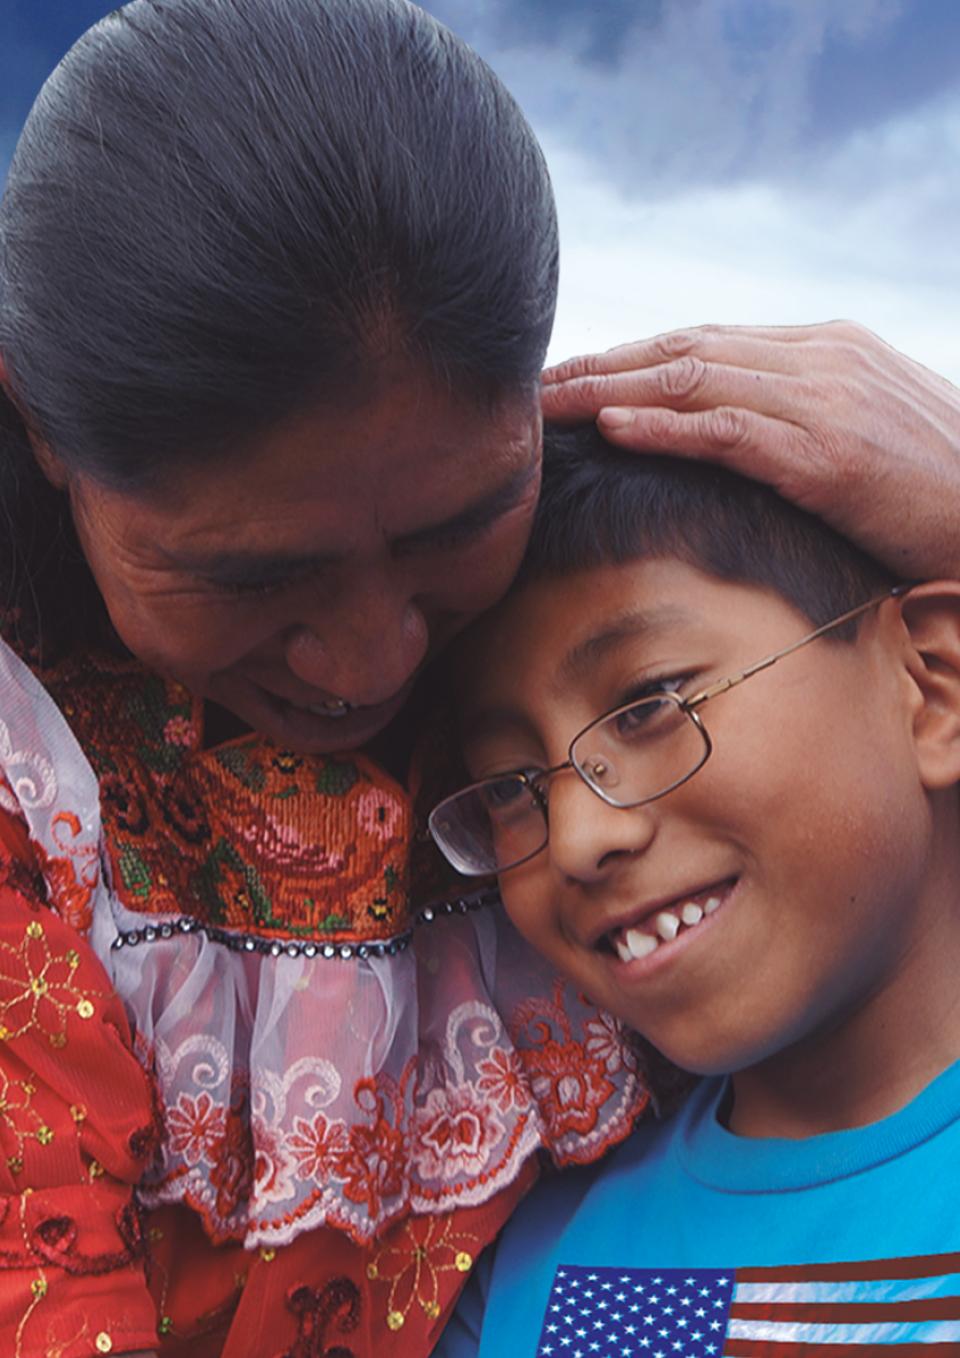 In Guatemala, a woman cradles the head of a young person. They are both smiling. The woman wears a red traditional Guatemalan dress and the boy wears a blue t-shirt with a U.S. flag printed on it.